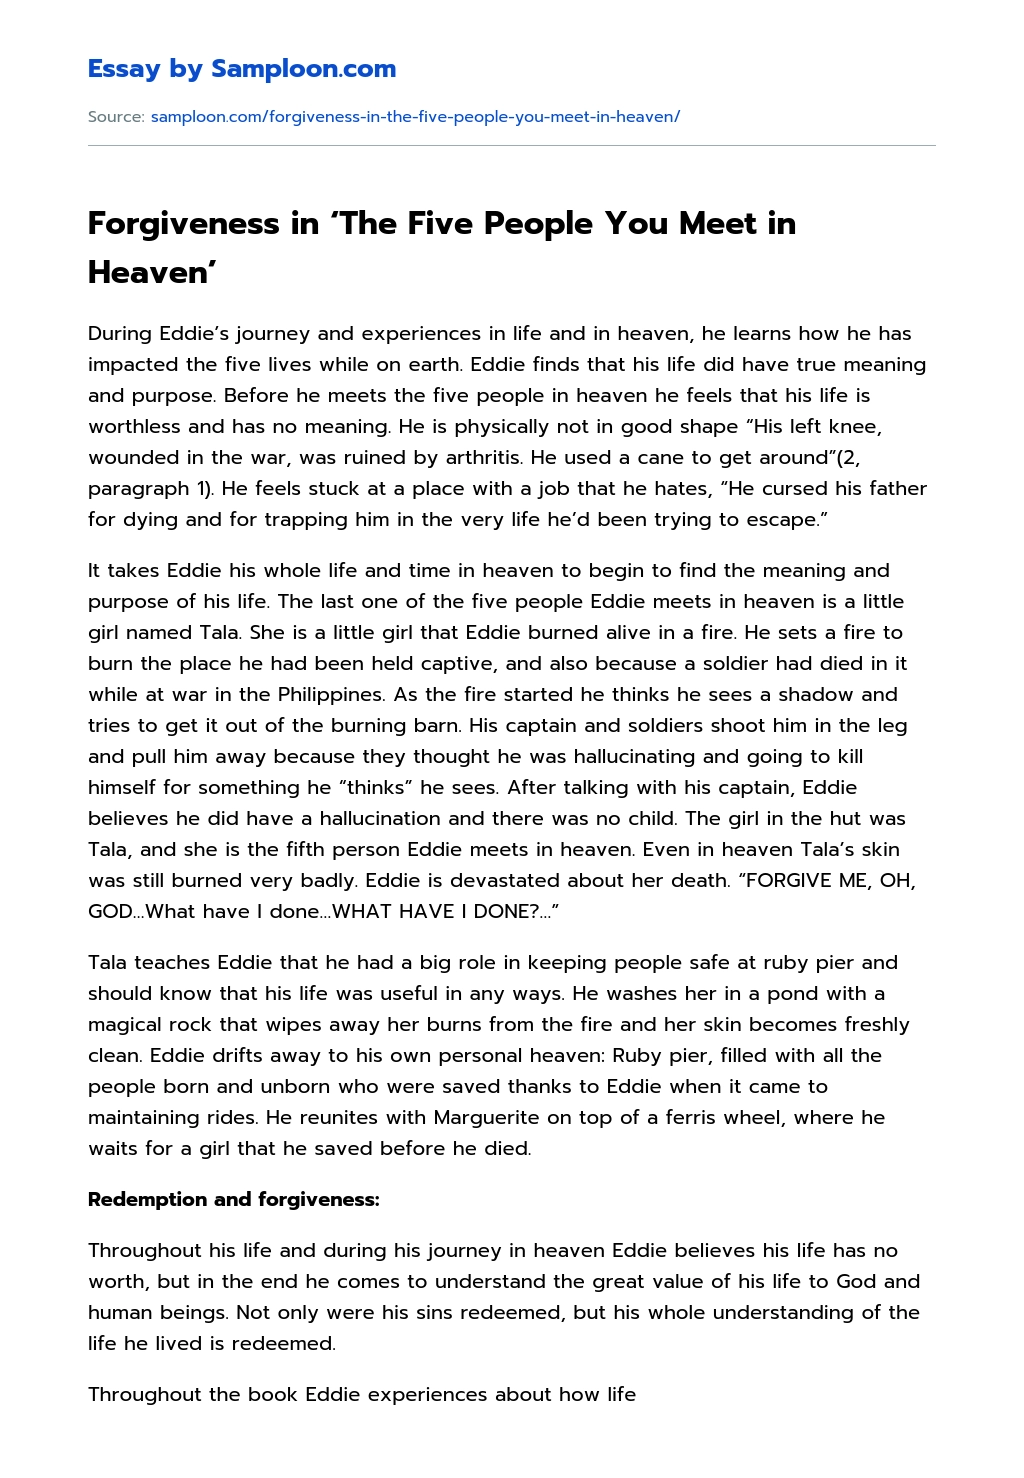 Forgiveness in ‘The Five People You Meet in Heaven’ Character Analysis essay